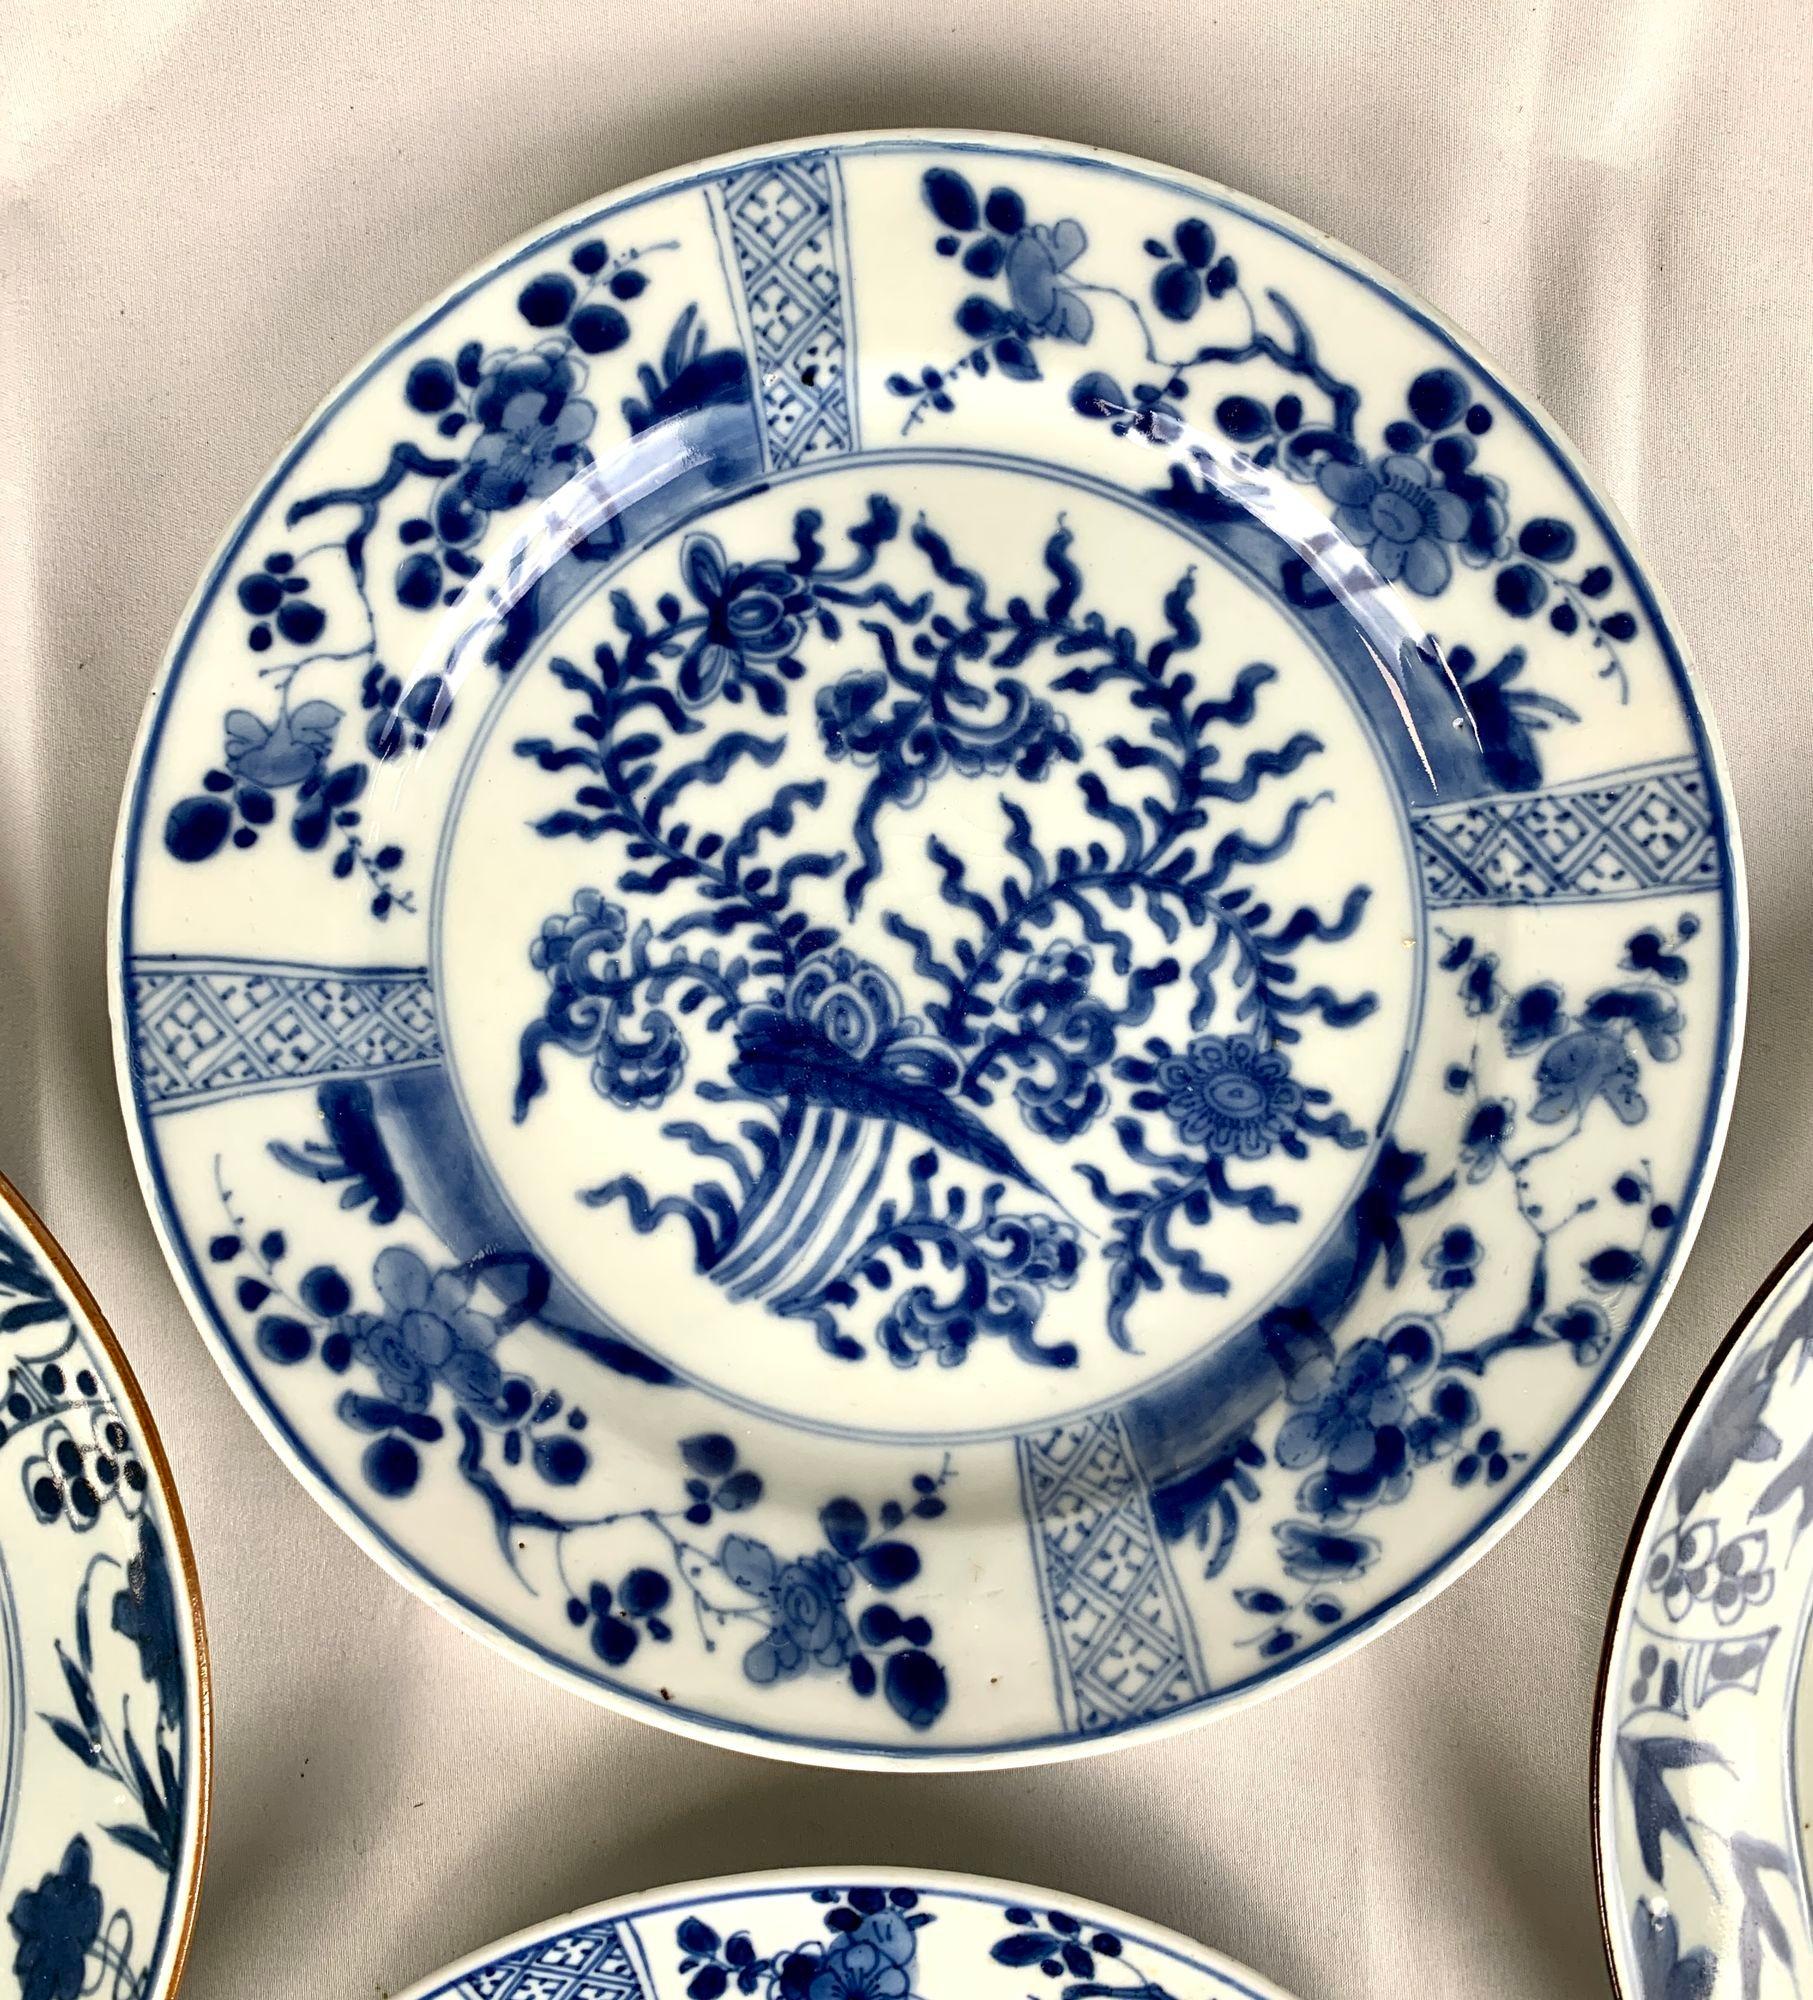 Two Pairs of Blue and White Chinese Porcelain Dishes 18th Century In Excellent Condition For Sale In Katonah, NY